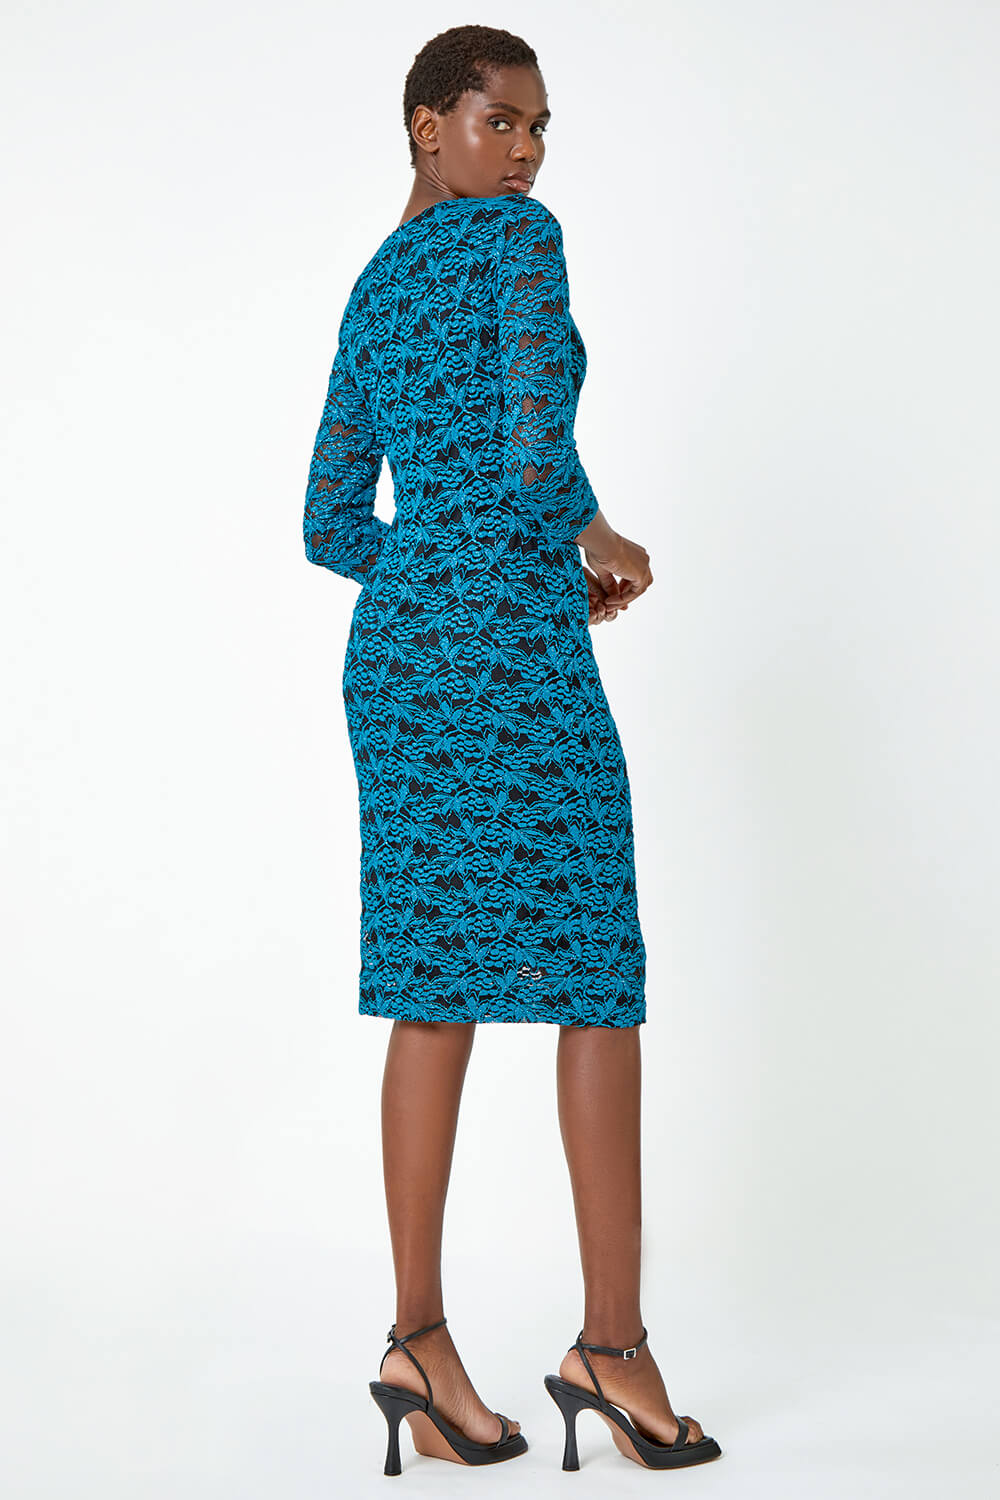 Teal Glitter Lace Ruched Shift Stretch Dress , Image 4 of 6